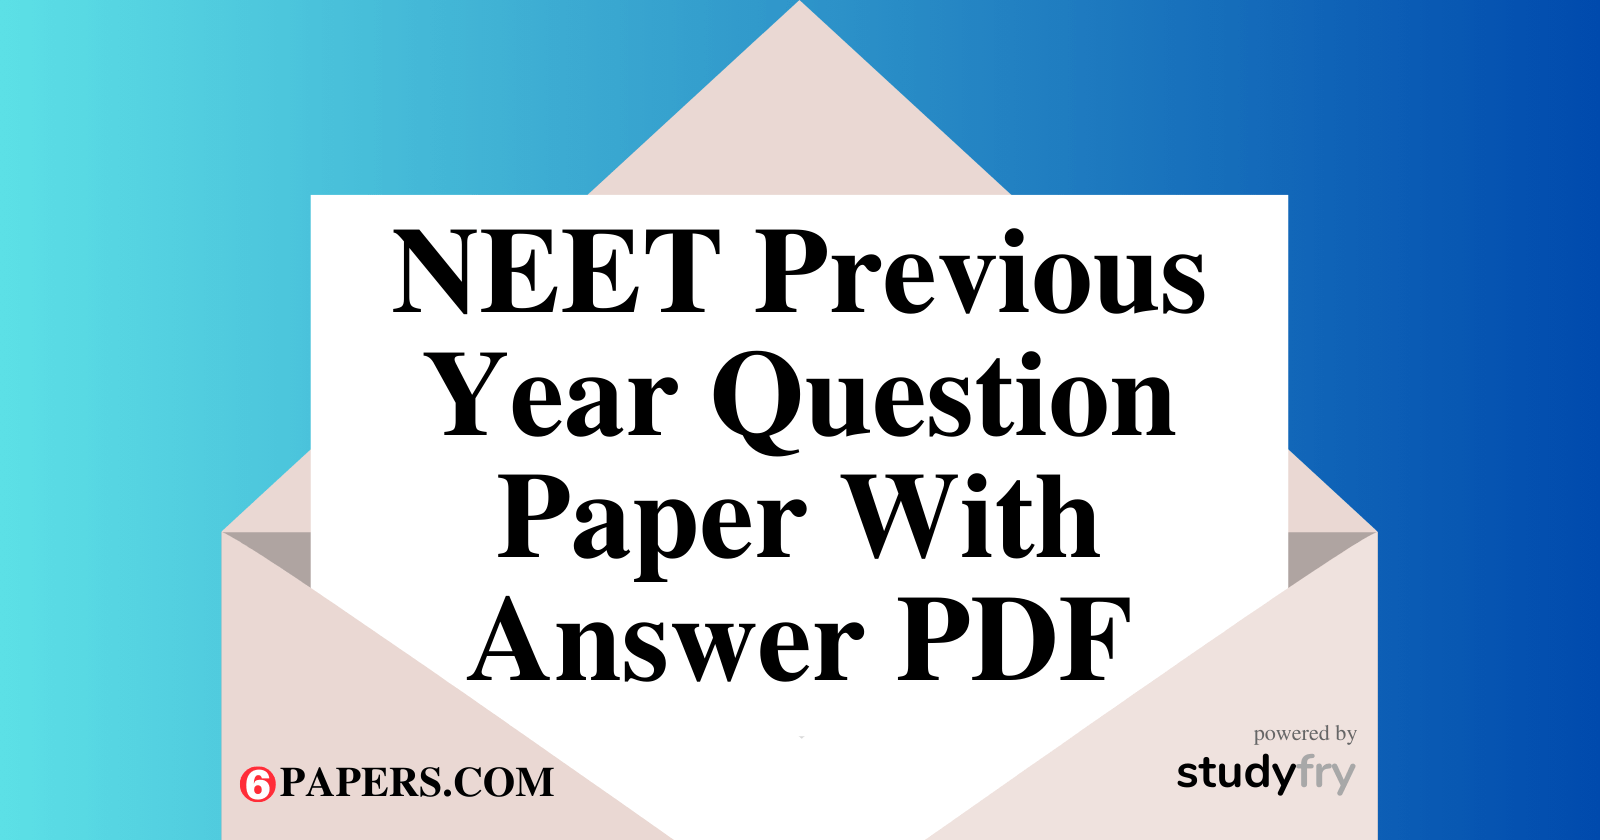 NEET Previous Year Question Paper With Answer PDF